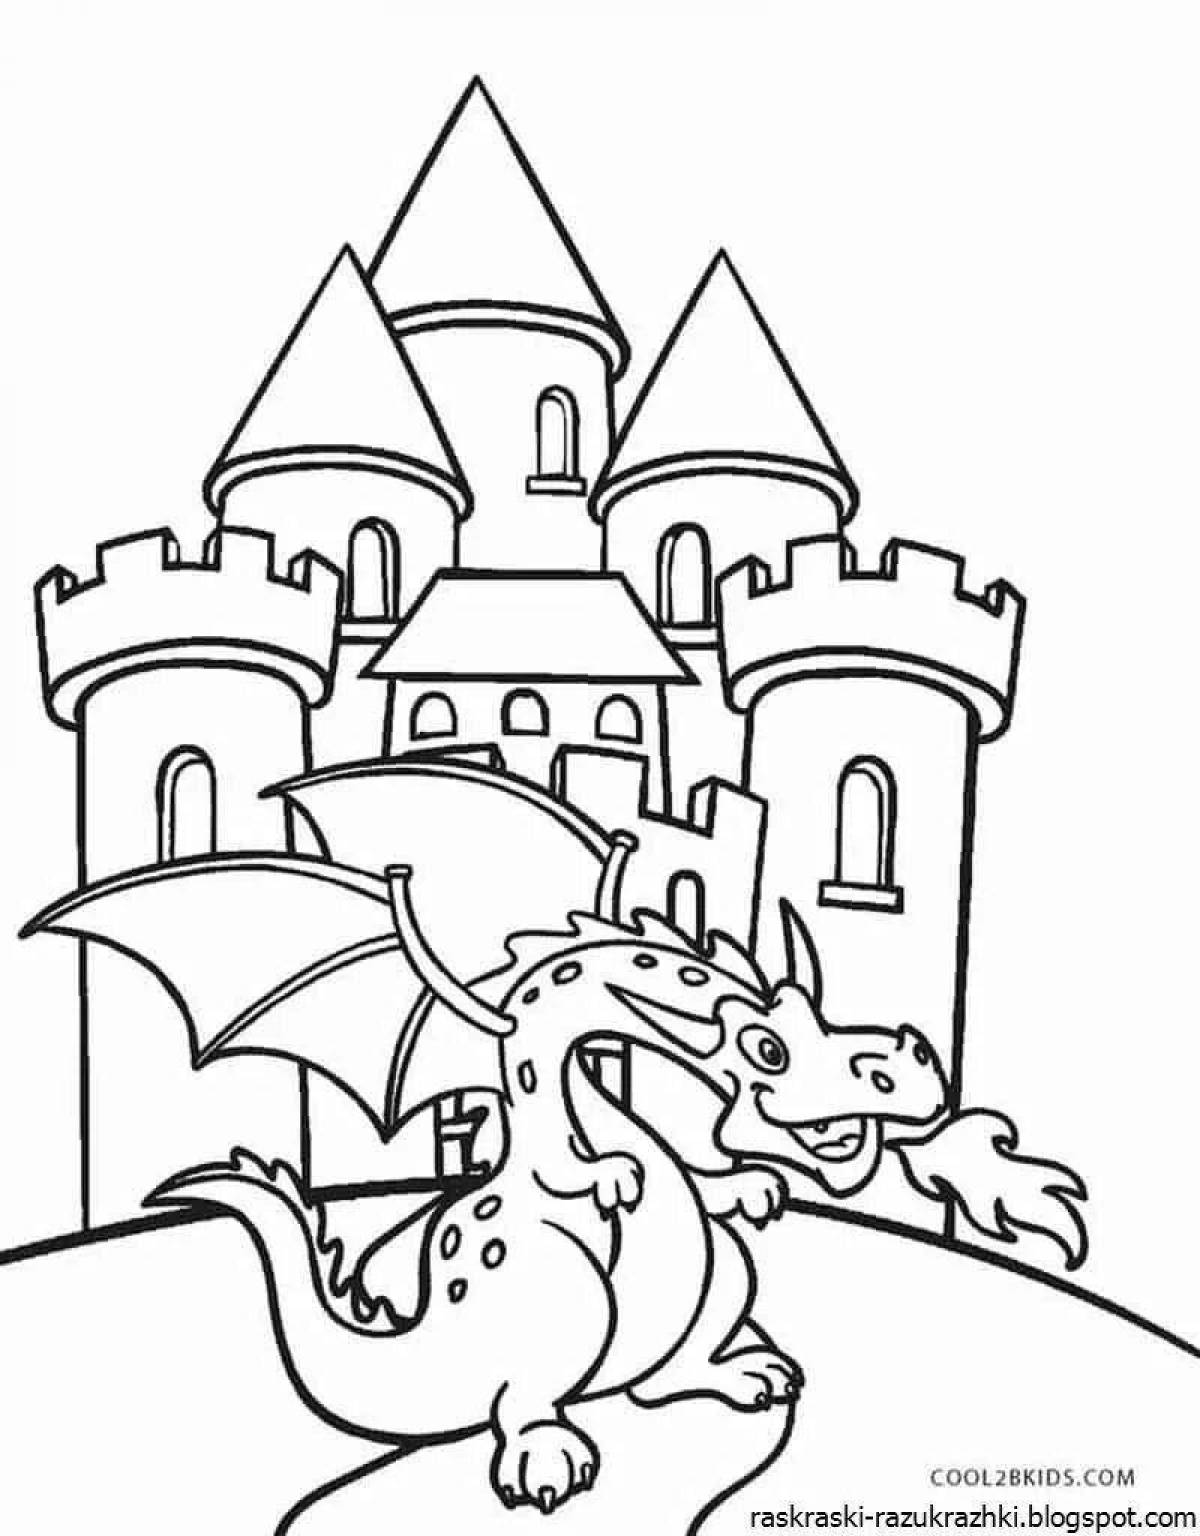 Majestic castles coloring book for kids